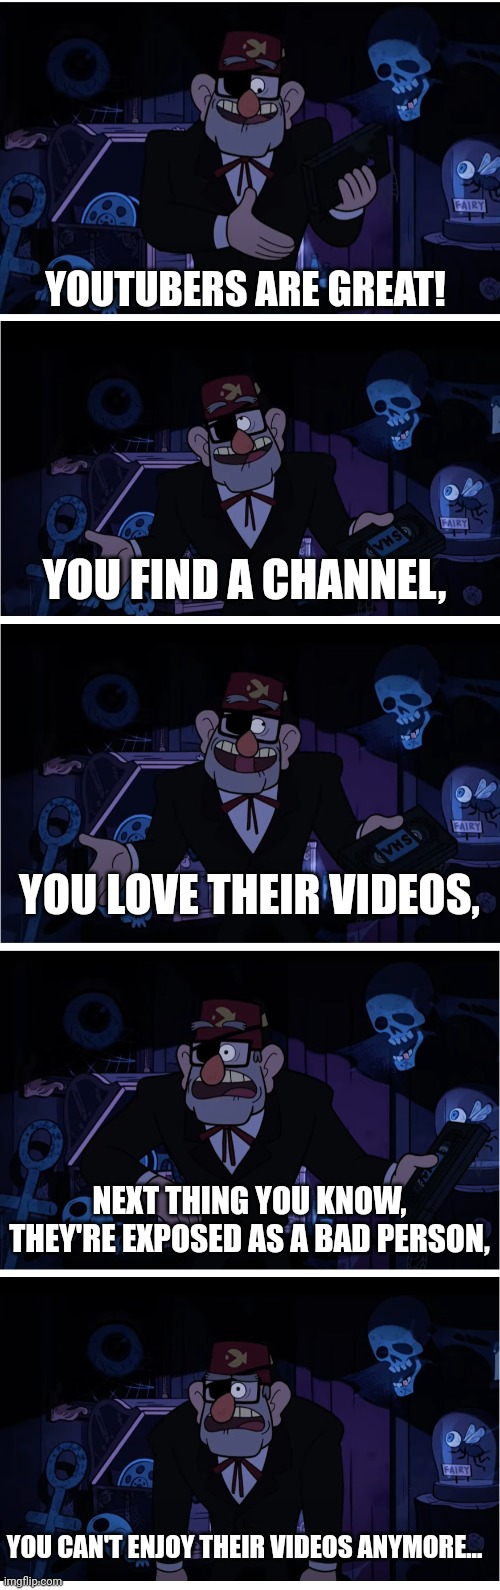 :( | YOUTUBERS ARE GREAT! YOU FIND A CHANNEL, YOU LOVE THEIR VIDEOS, NEXT THING YOU KNOW, THEY'RE EXPOSED AS A BAD PERSON, YOU CAN'T ENJOY THEIR VIDEOS ANYMORE... | image tagged in grunkle stan describes,youtubers,youtube,youtuber,controversy,sad | made w/ Imgflip meme maker